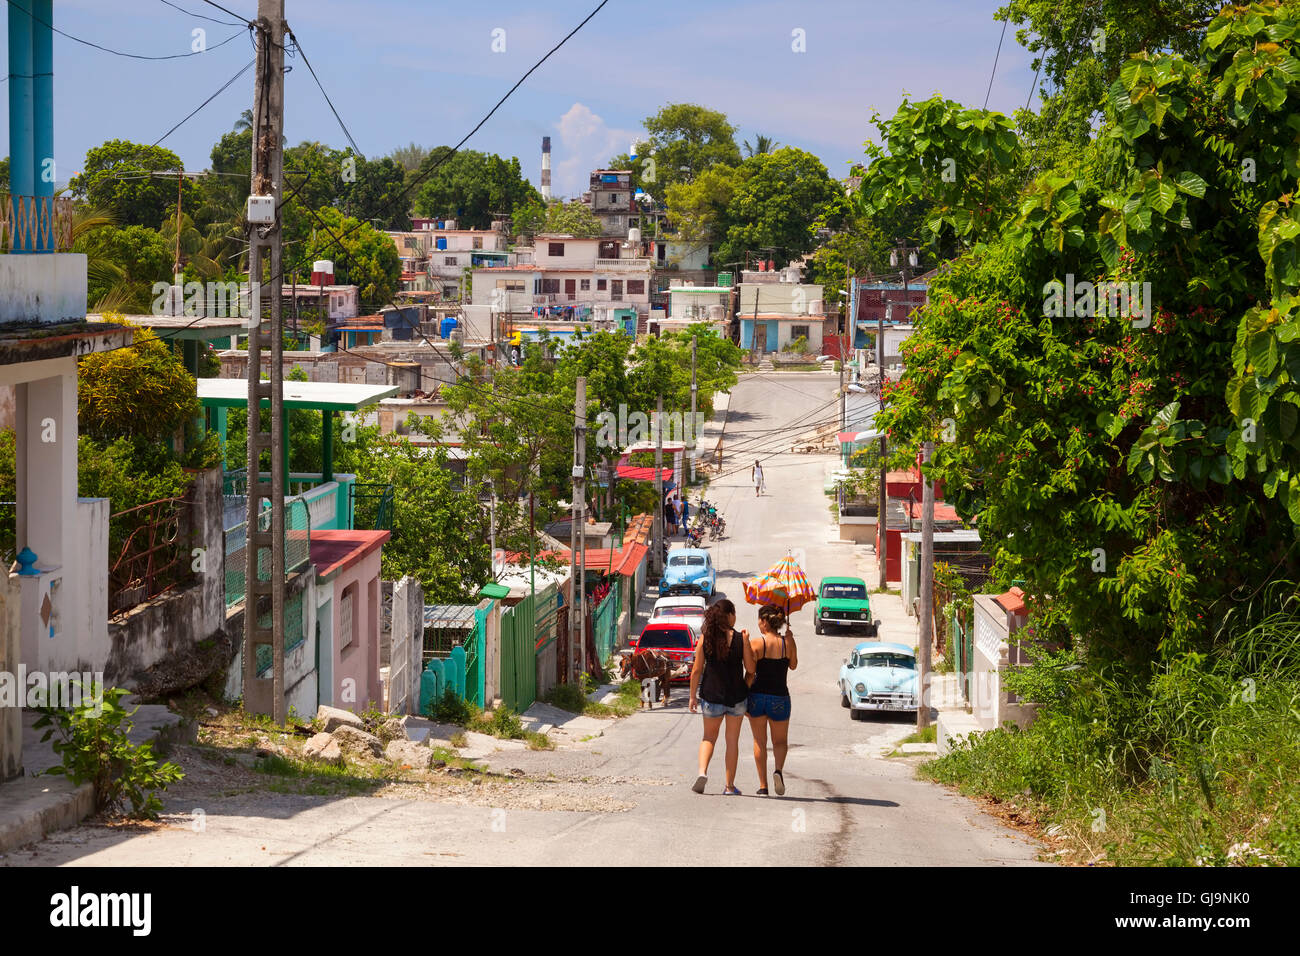 Everyday life looking down a street in the municipality of Guanabacoa, Havana, Cuba. Stock Photo